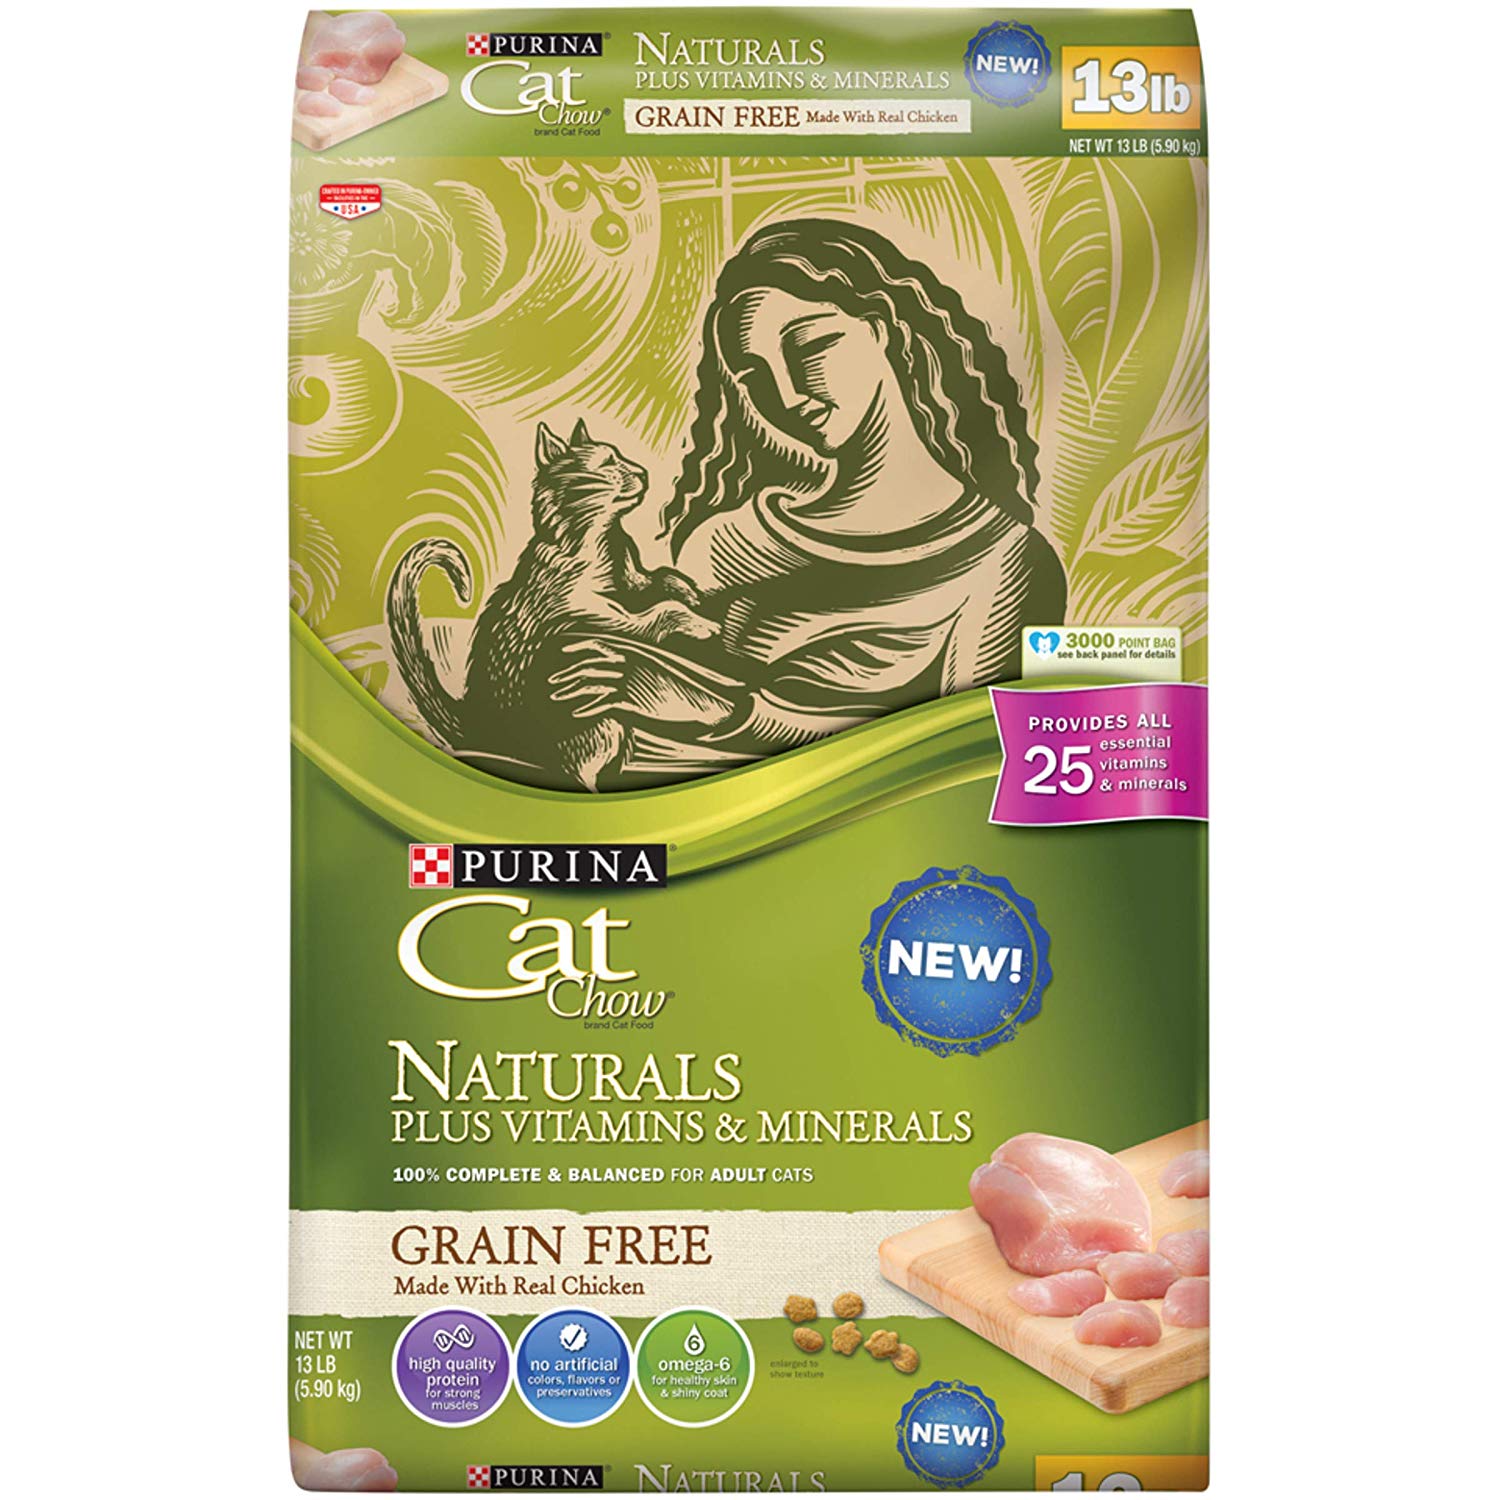 13lb Purina Cat Chow Naturals GrainFree With Real Chicken Adult Dry